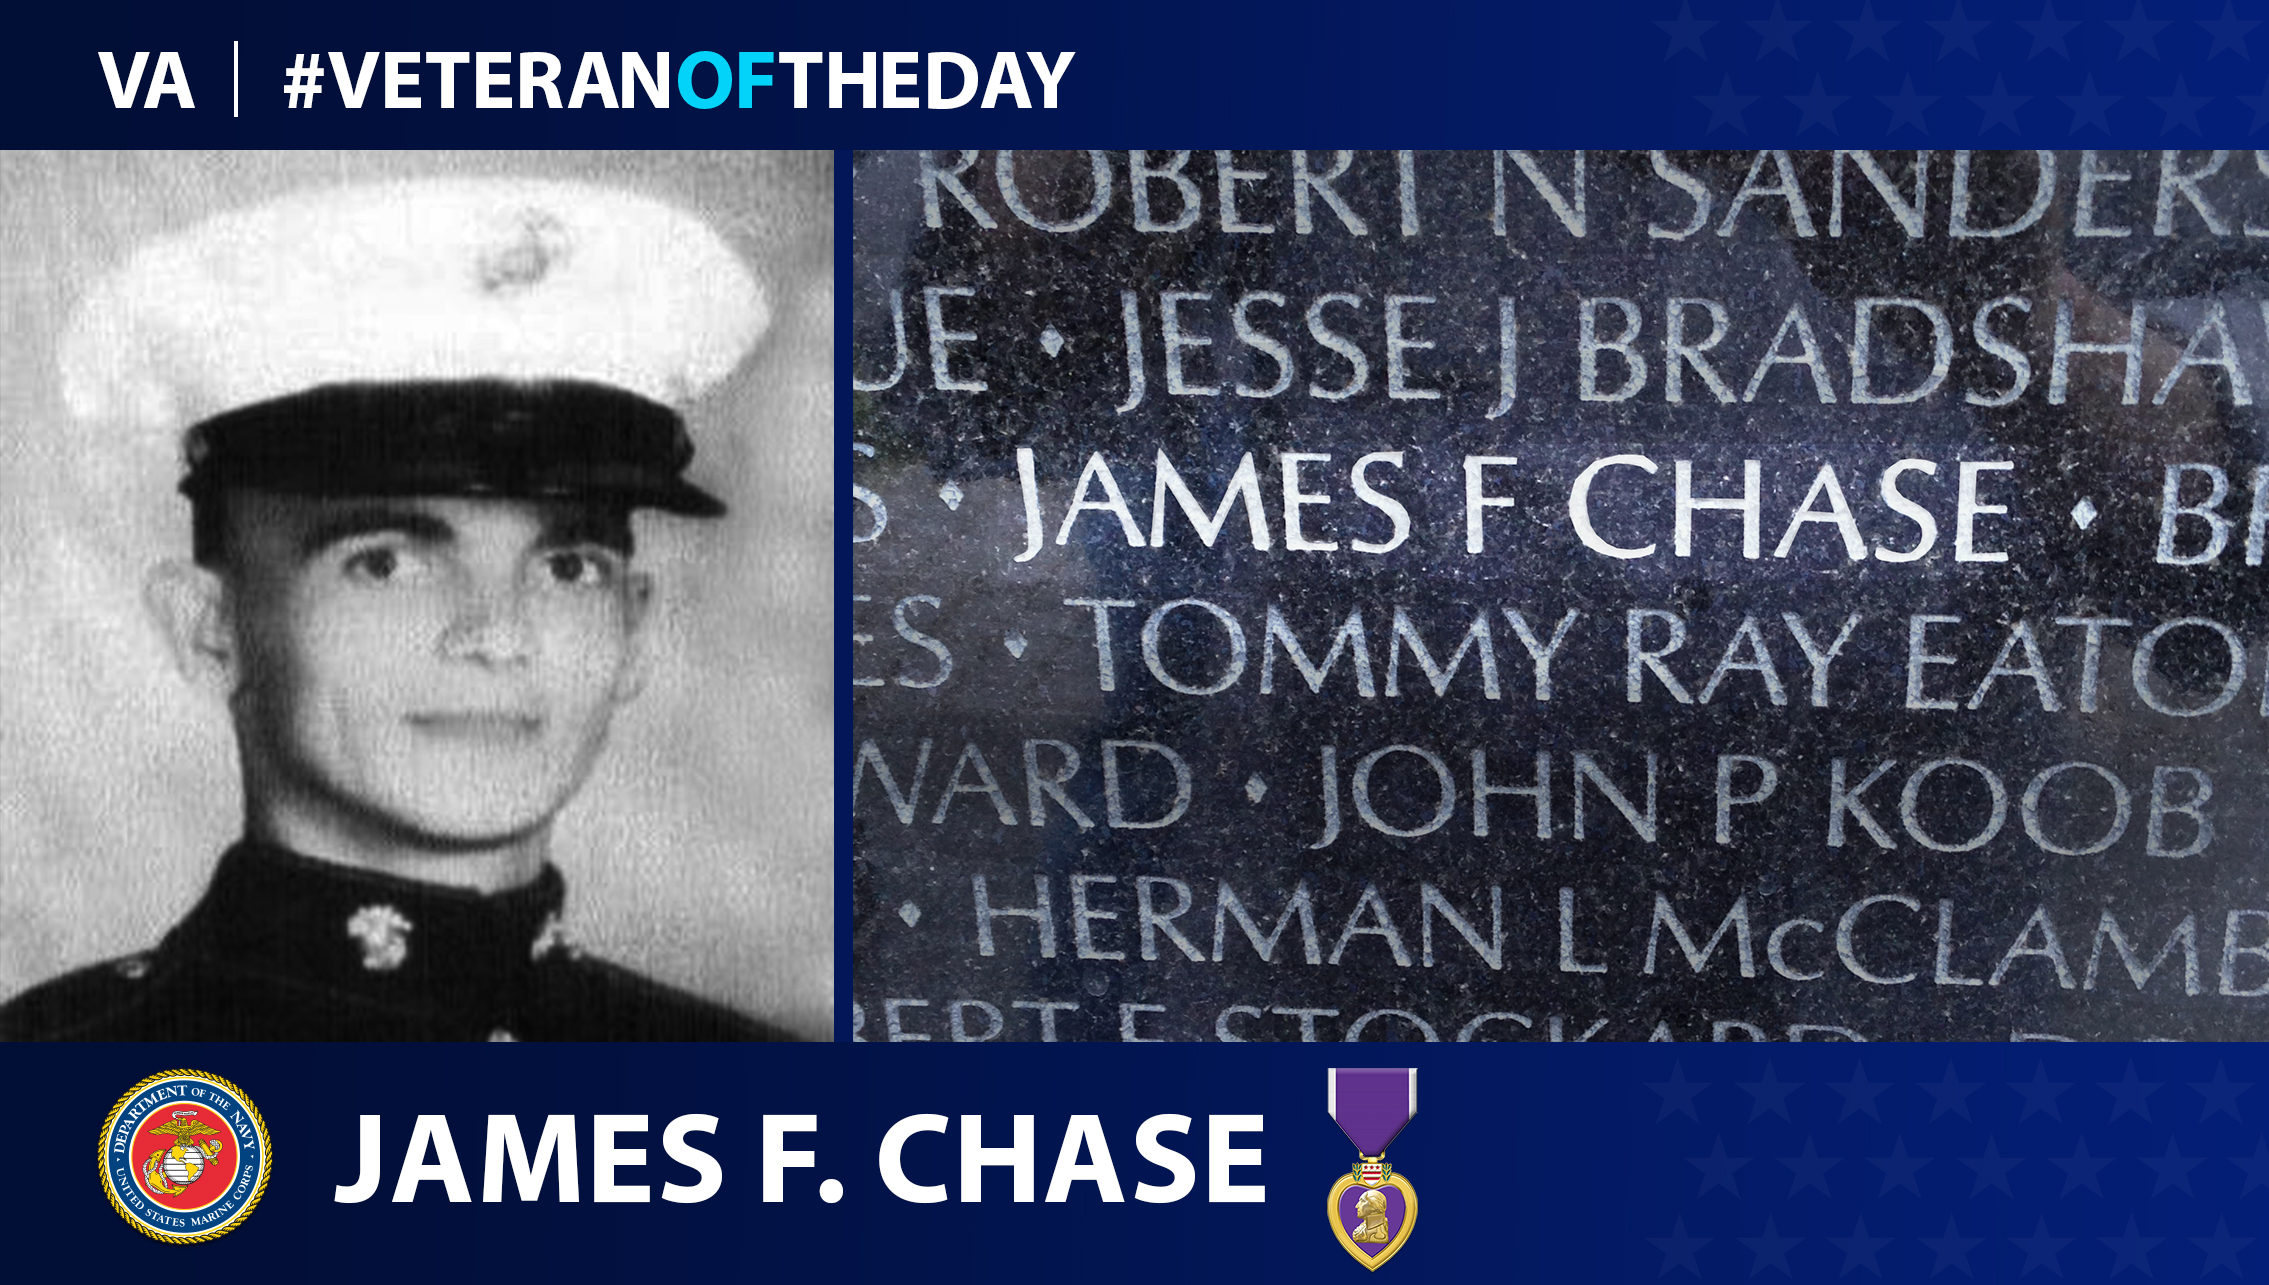 Marine Corps Veteran James Francis Chase is today's Veteran of the Day.